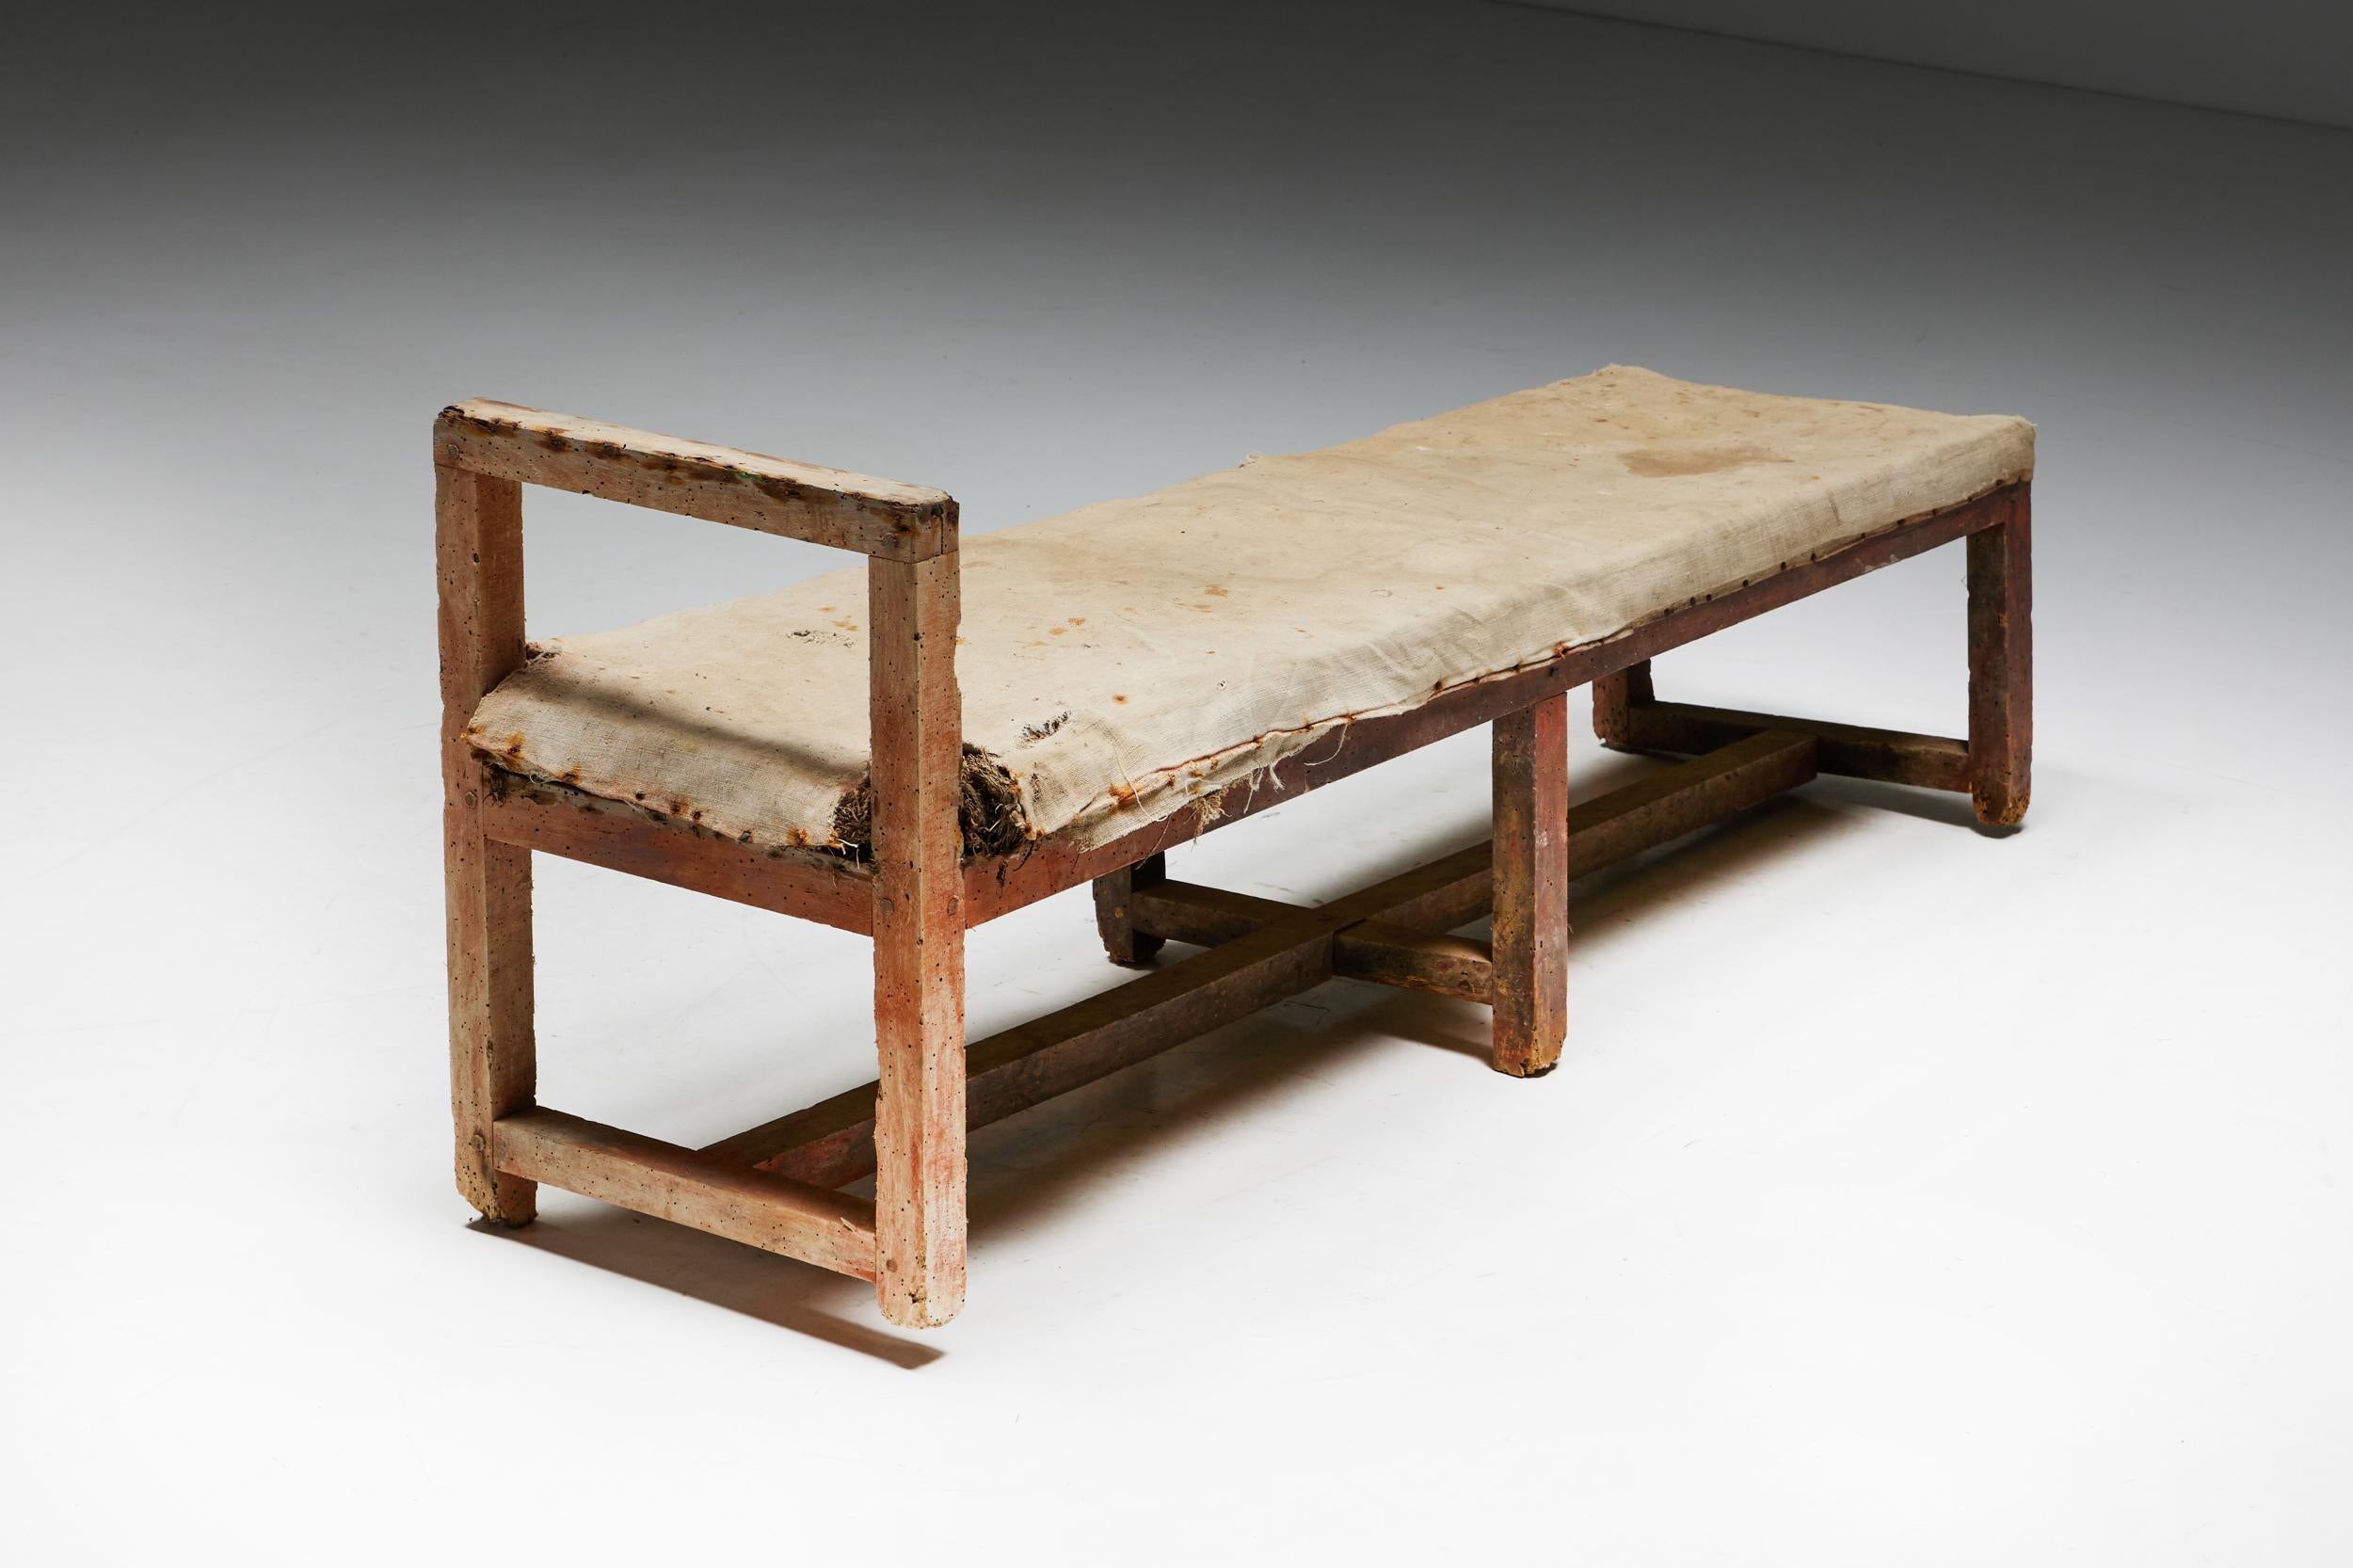 Pair of Rustic Travail Populaire Benches, France, 19th Century For Sale 5